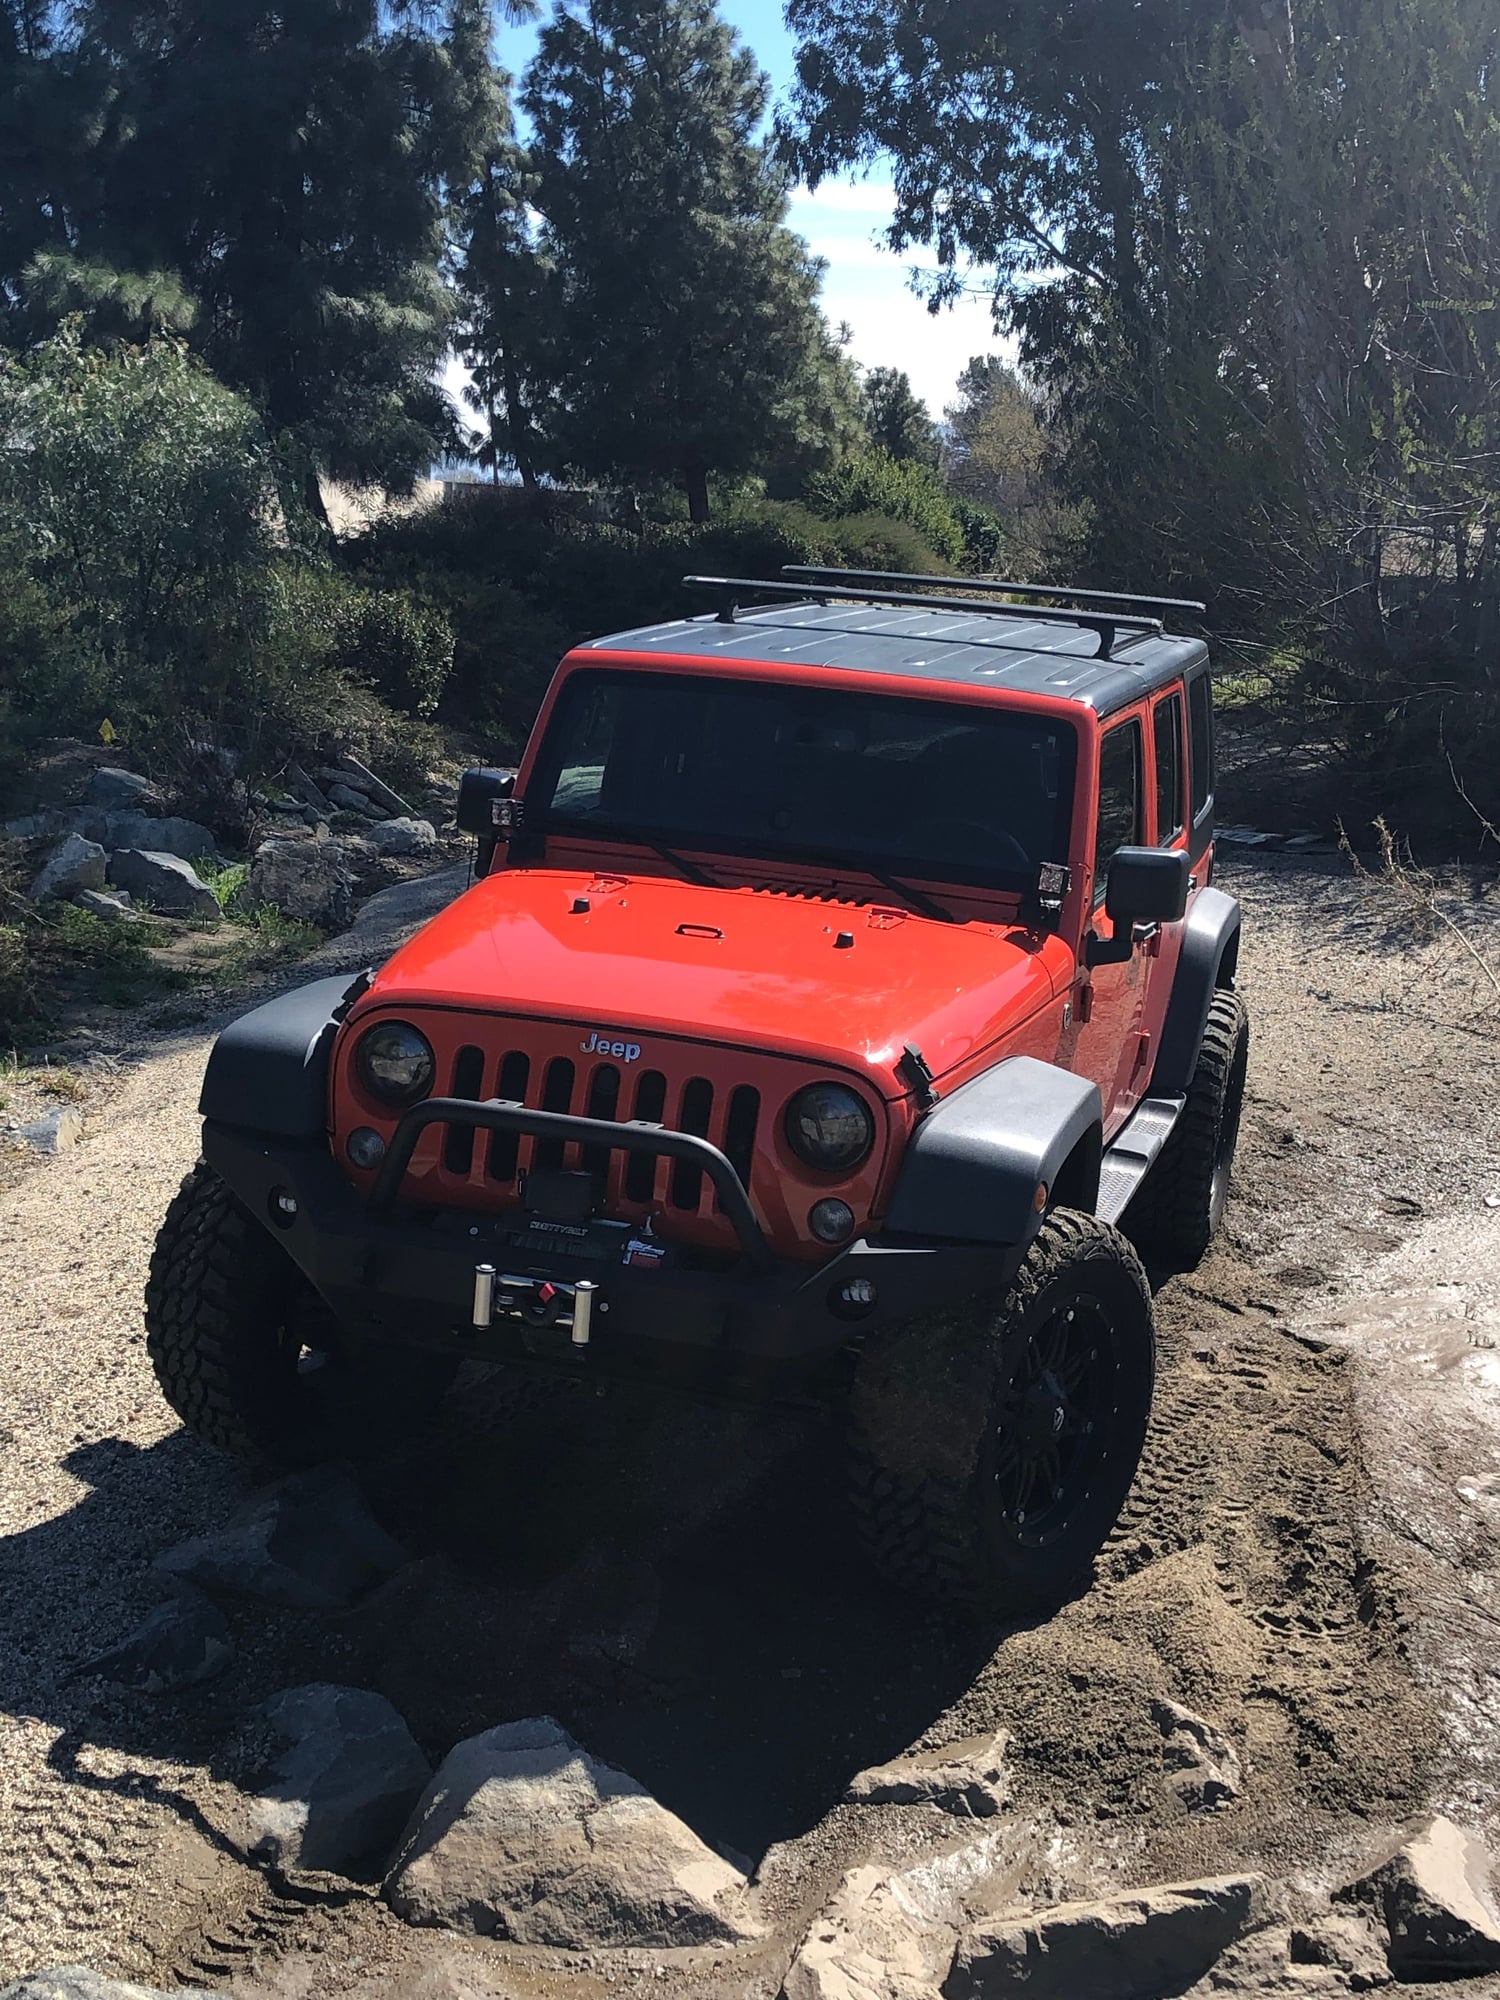 2015 Jeep Wrangler - Ready to go anywhere jku in excellent condition. - Used - VIN 1C4BJWDGXFL699189 - 92,000 Miles - 6 cyl - 4WD - Automatic - SUV - Orange - Murrieta, CA 92563, United States